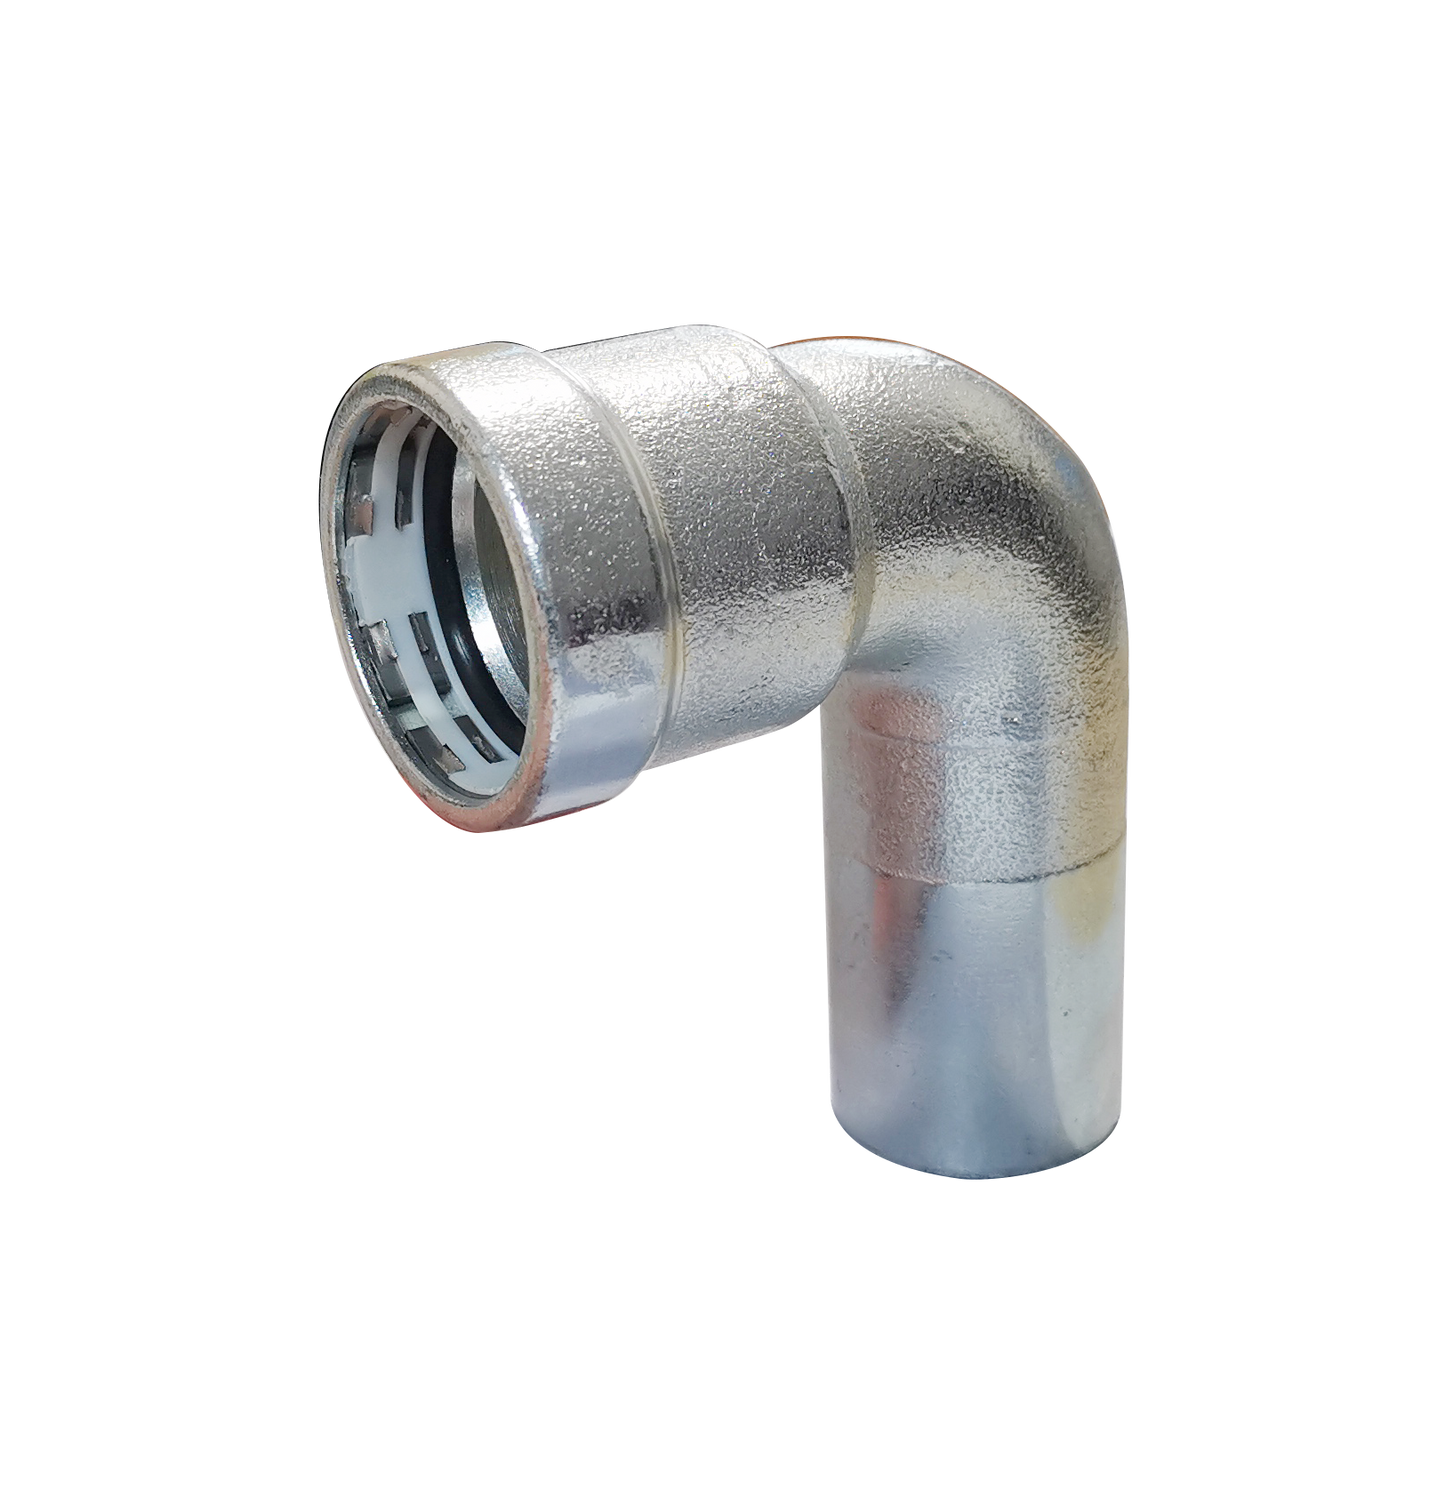 LC-Press Carbon steel Press fittings for thick-wall steel pipe, 90° Elbow with Plain End, 1x1 inch PxFTG